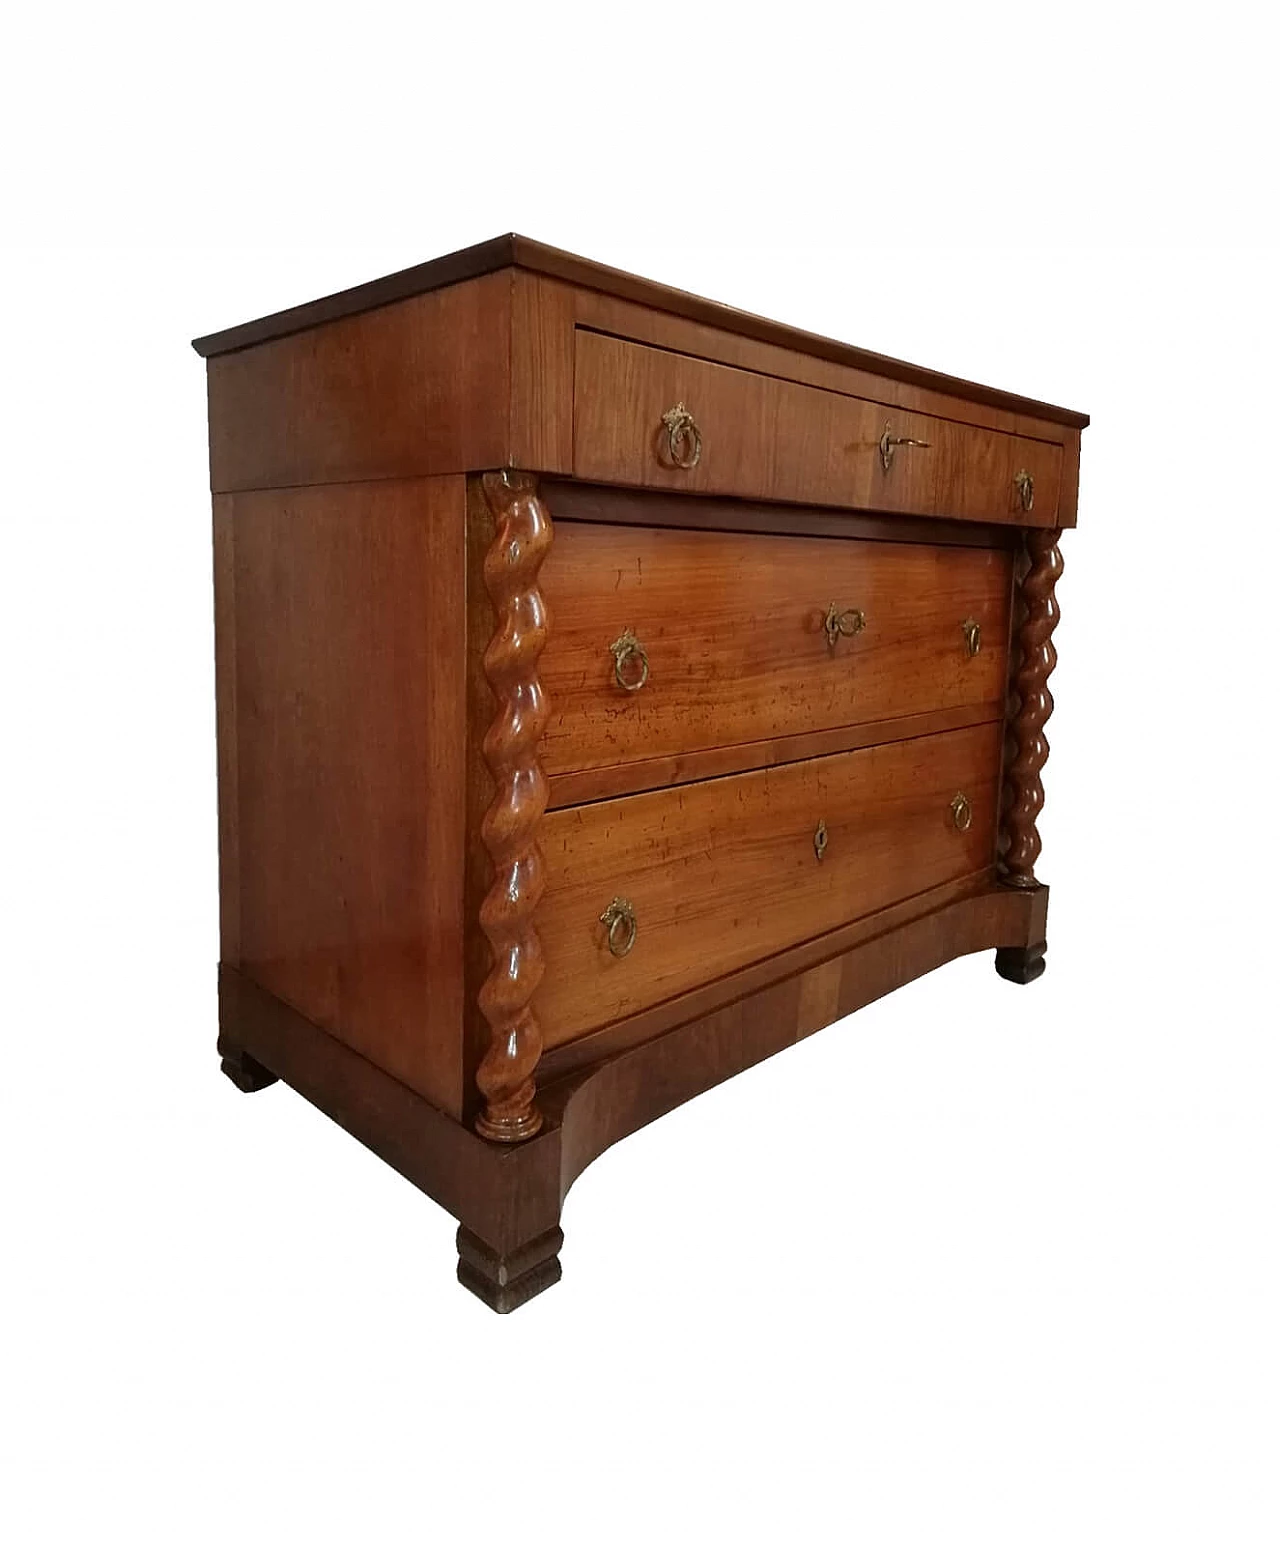 Walnut chest of drawers with turned columns, early 20th century 1062876